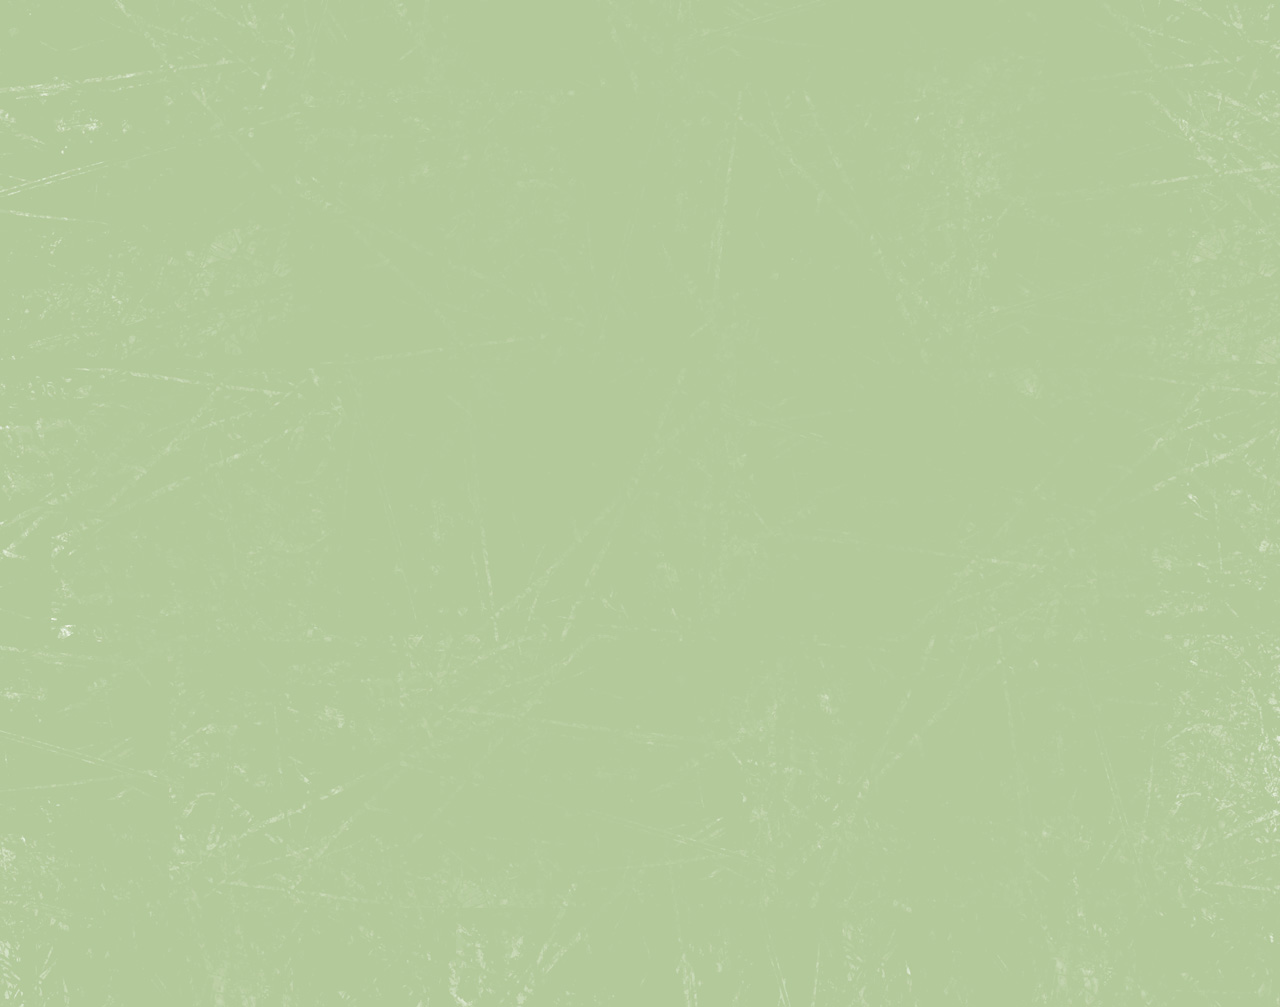 Green Solid Color Background with Matte Texture Wallpaper Design Stock  Image  Image of smooth background 151675837